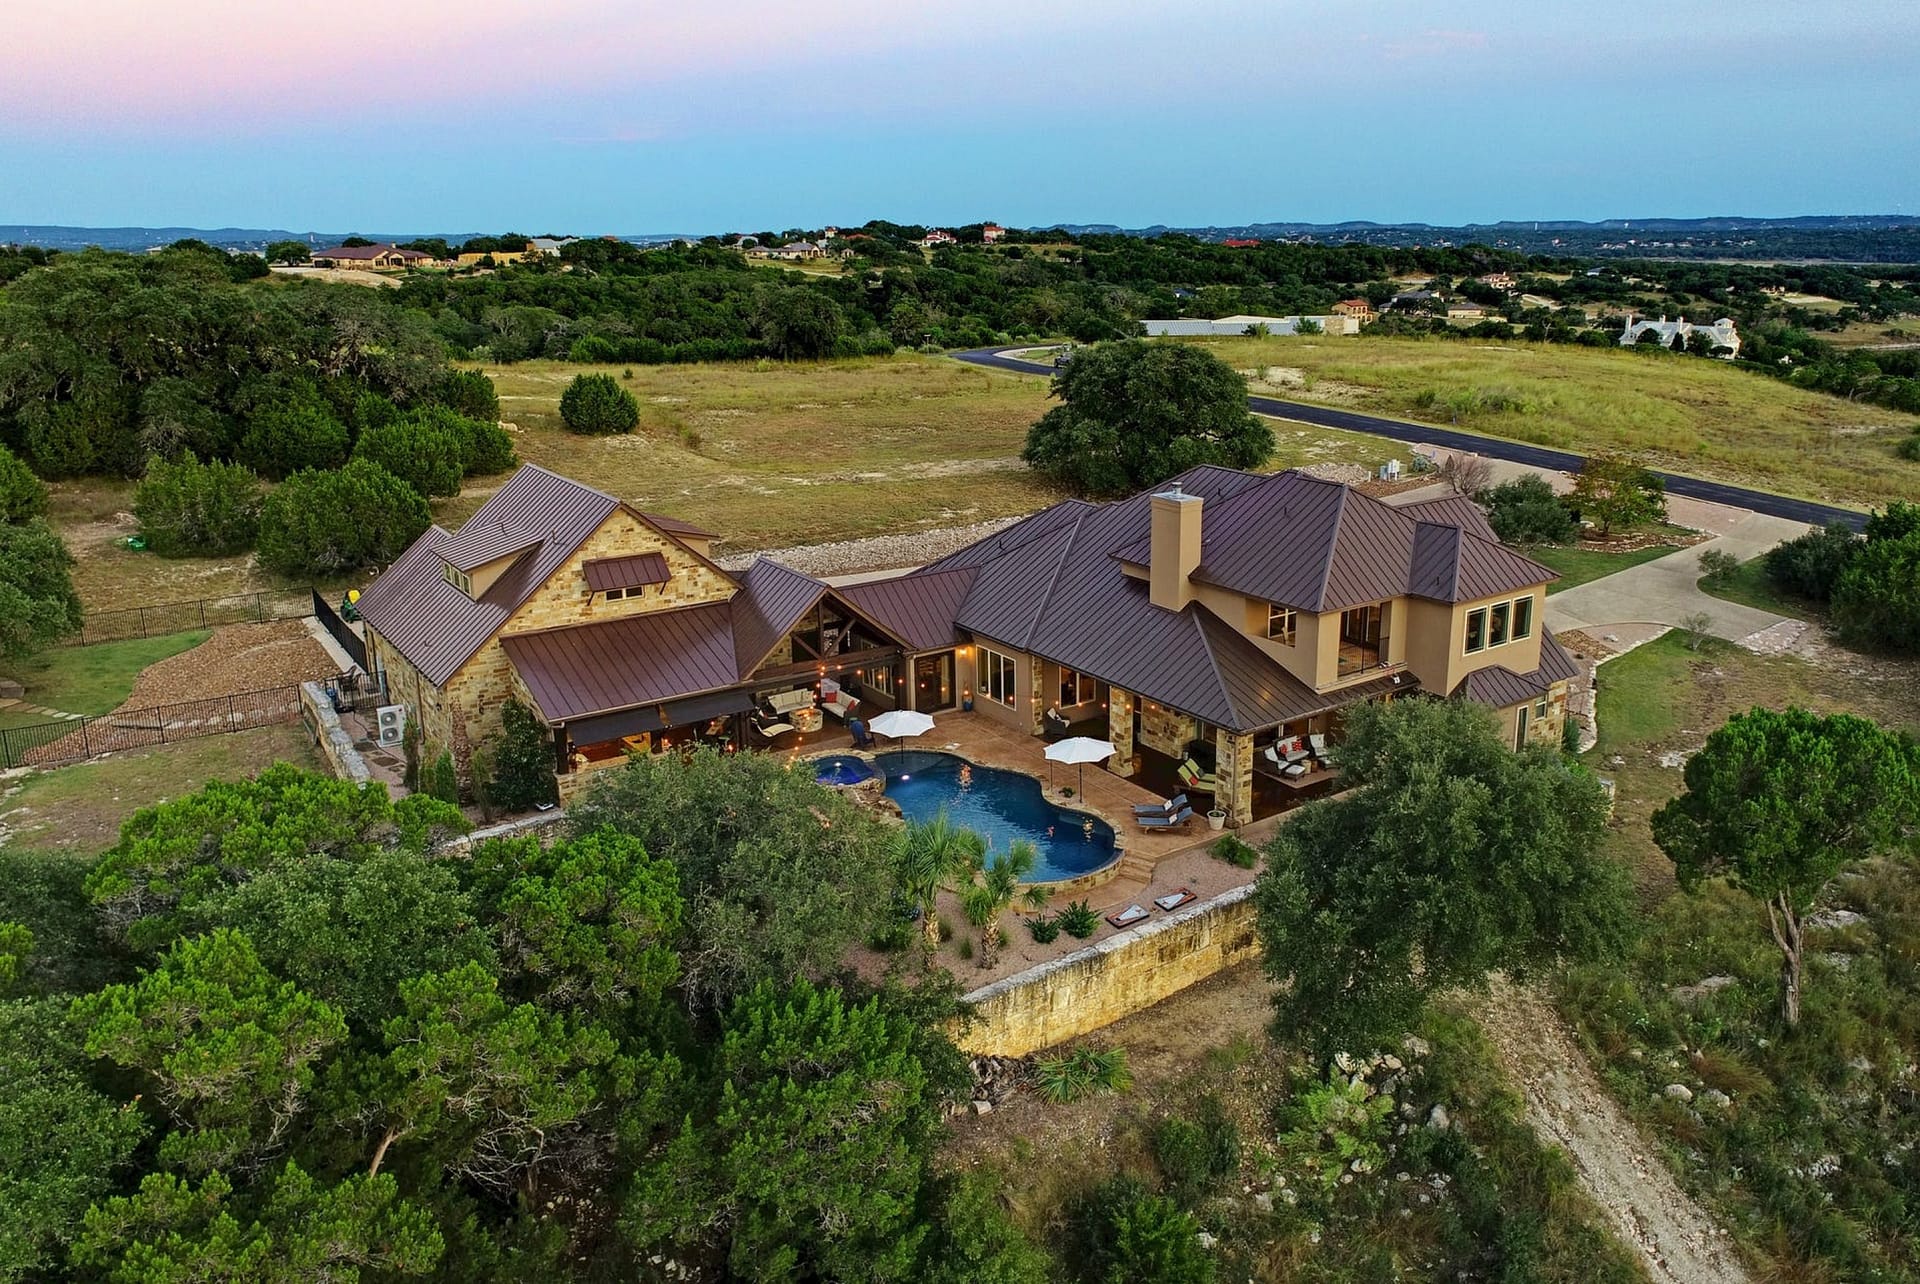 014-396516-264 River Cliff Place - Aerials 012_10744836